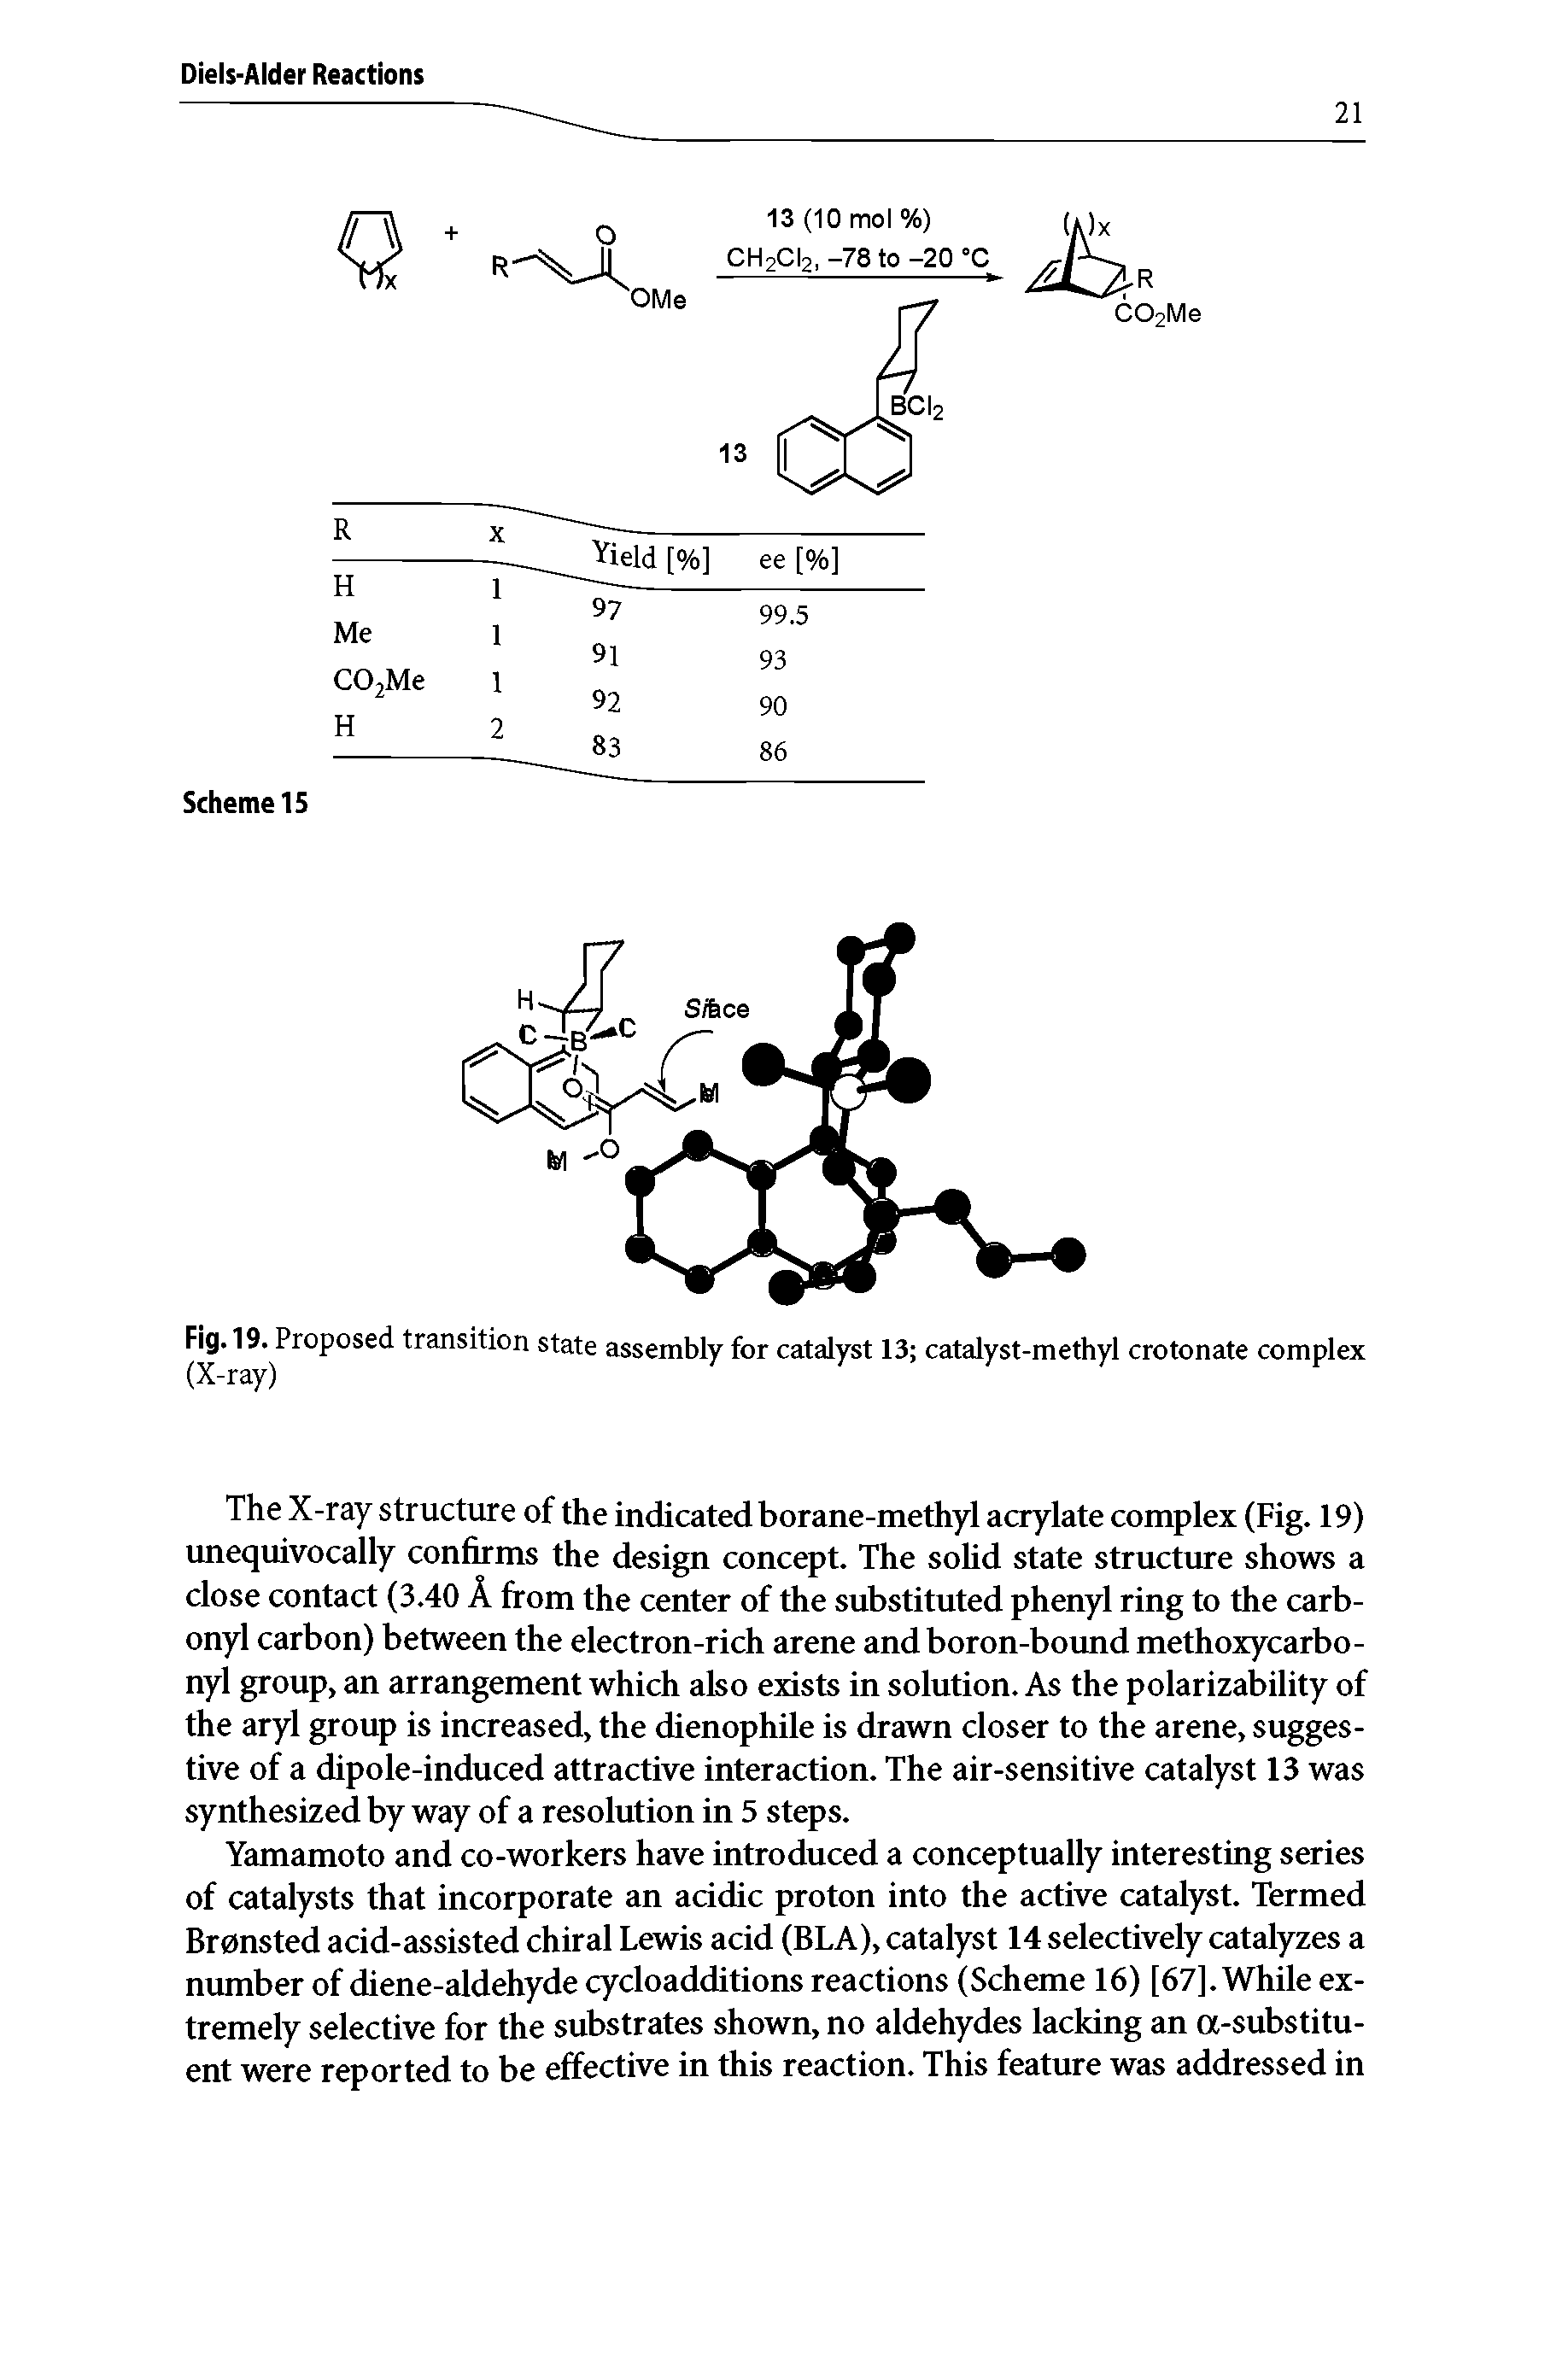 Fig. 19. Proposed transition state assembly for catalyst 13 catalyst-methyl crotonate complex...